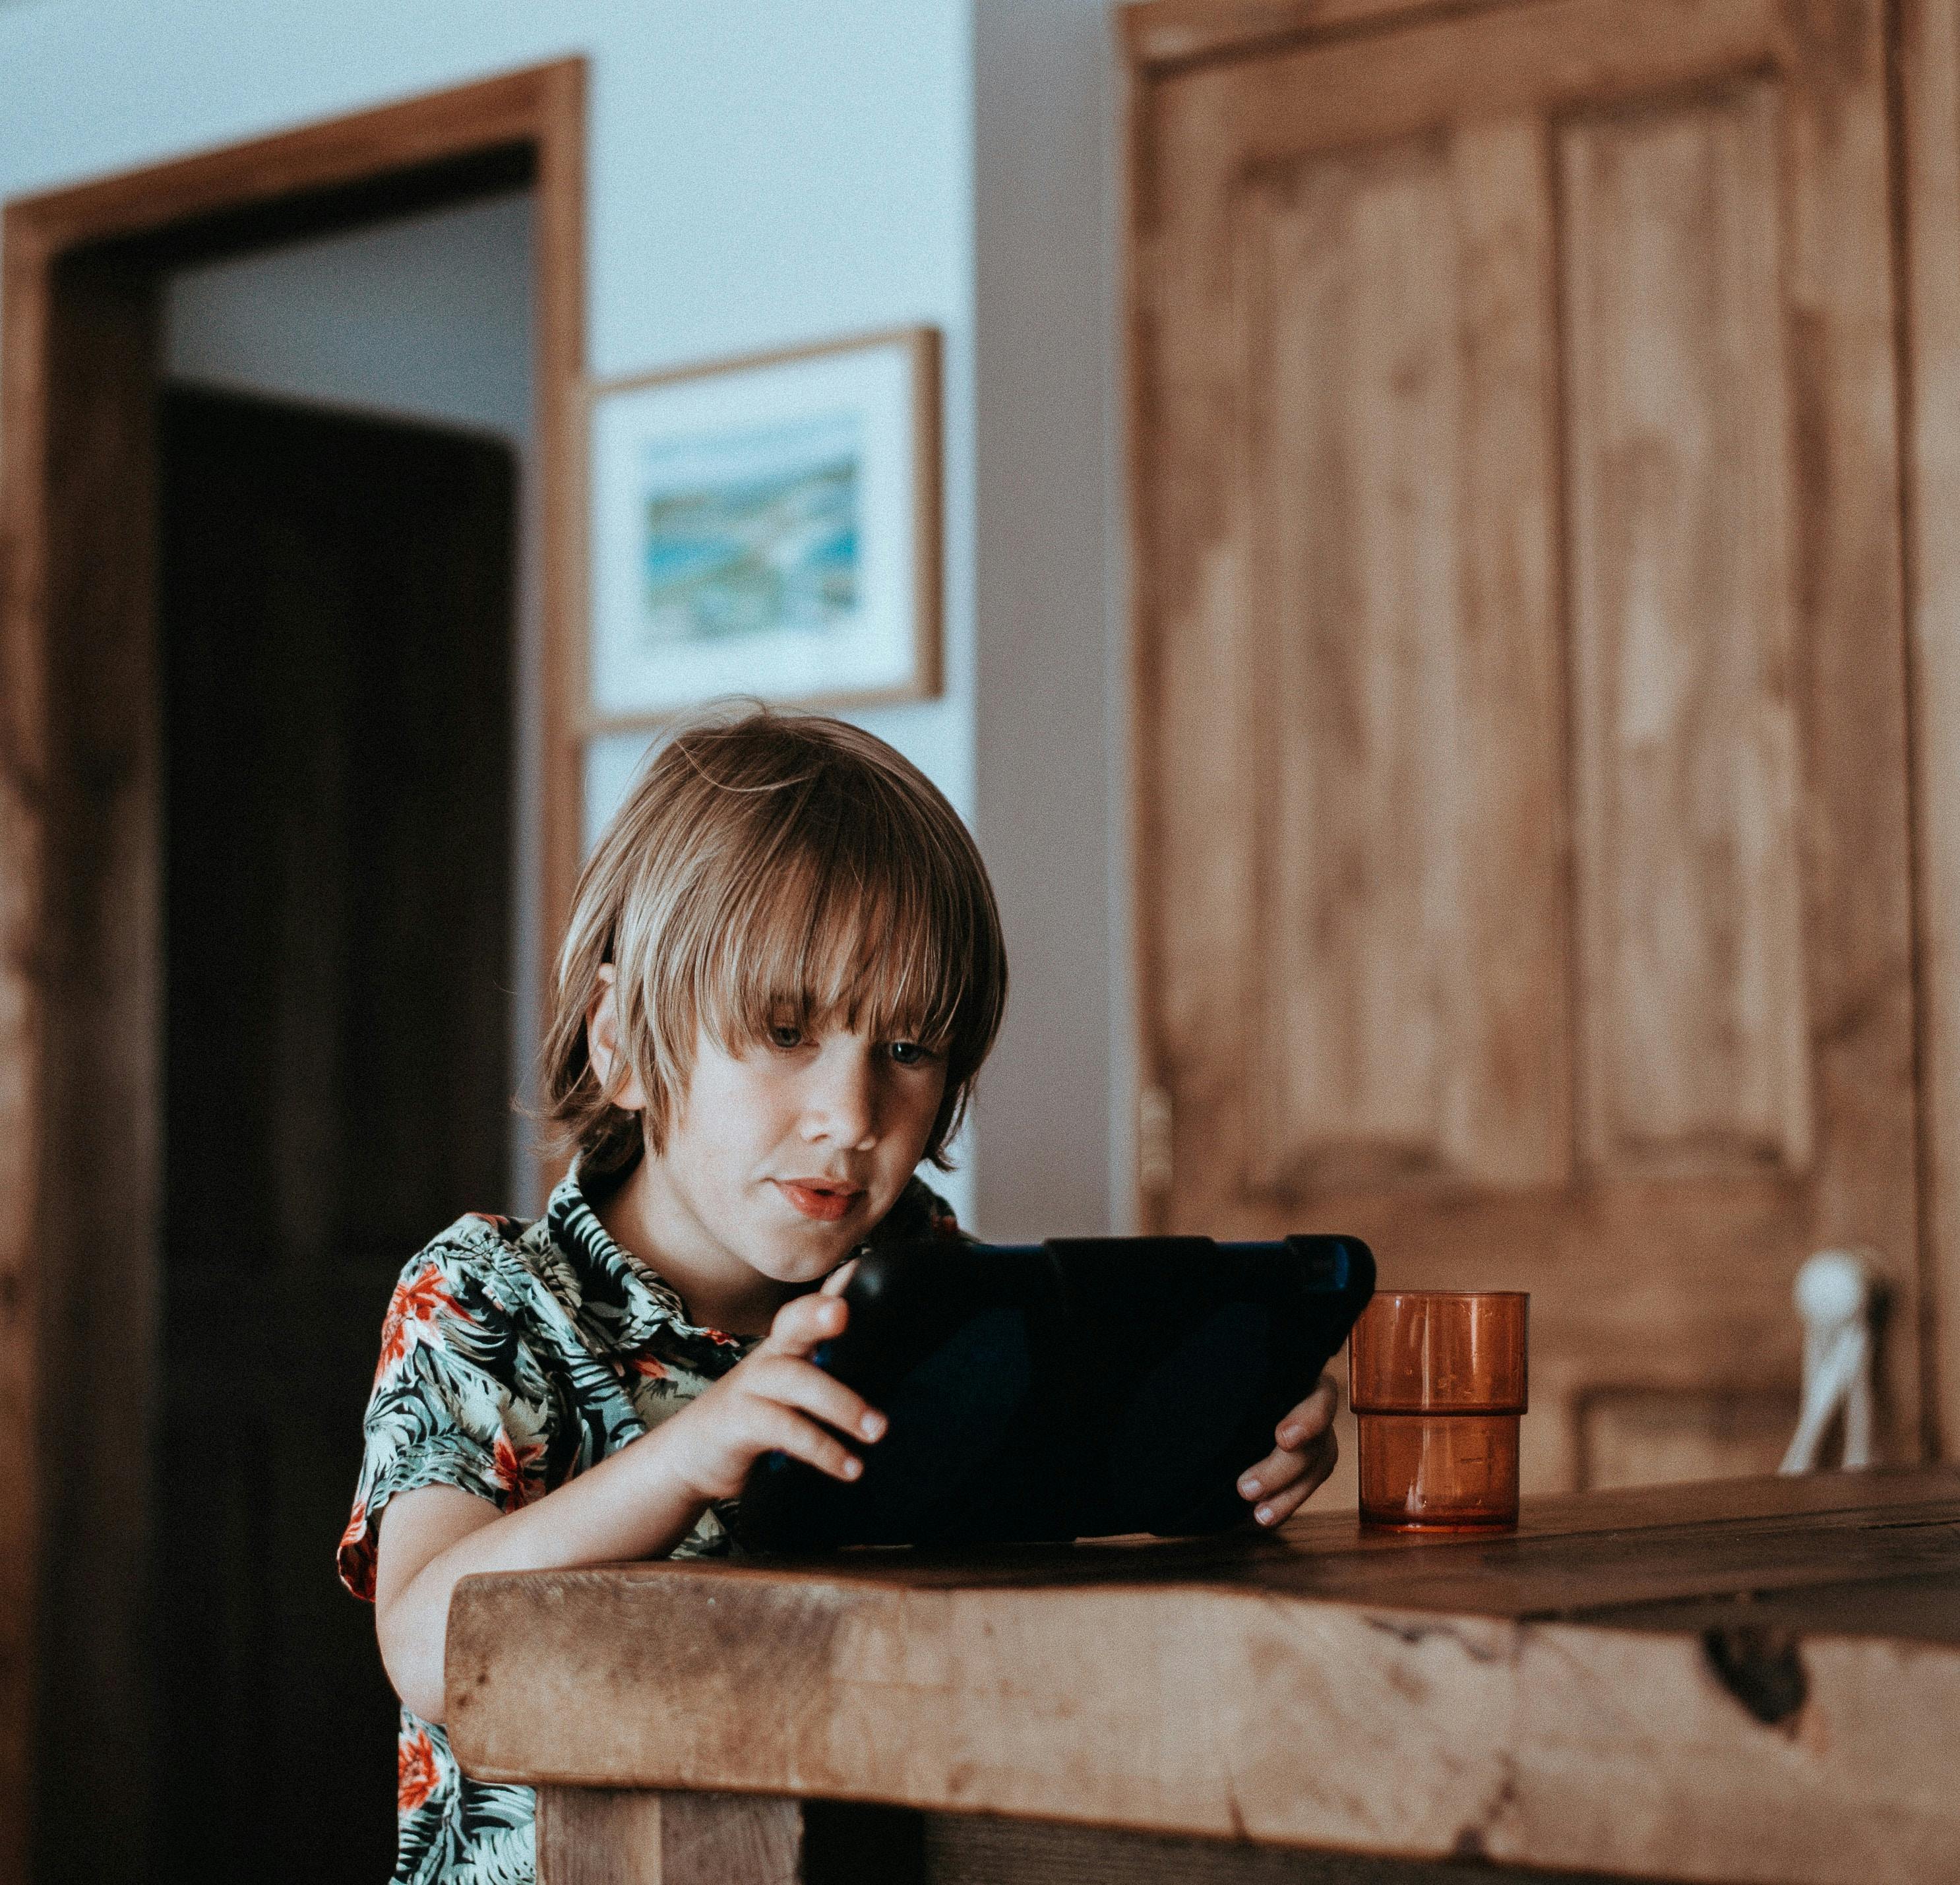 Child sitting at counter looking at a tablet with a beverage sitting next to him.